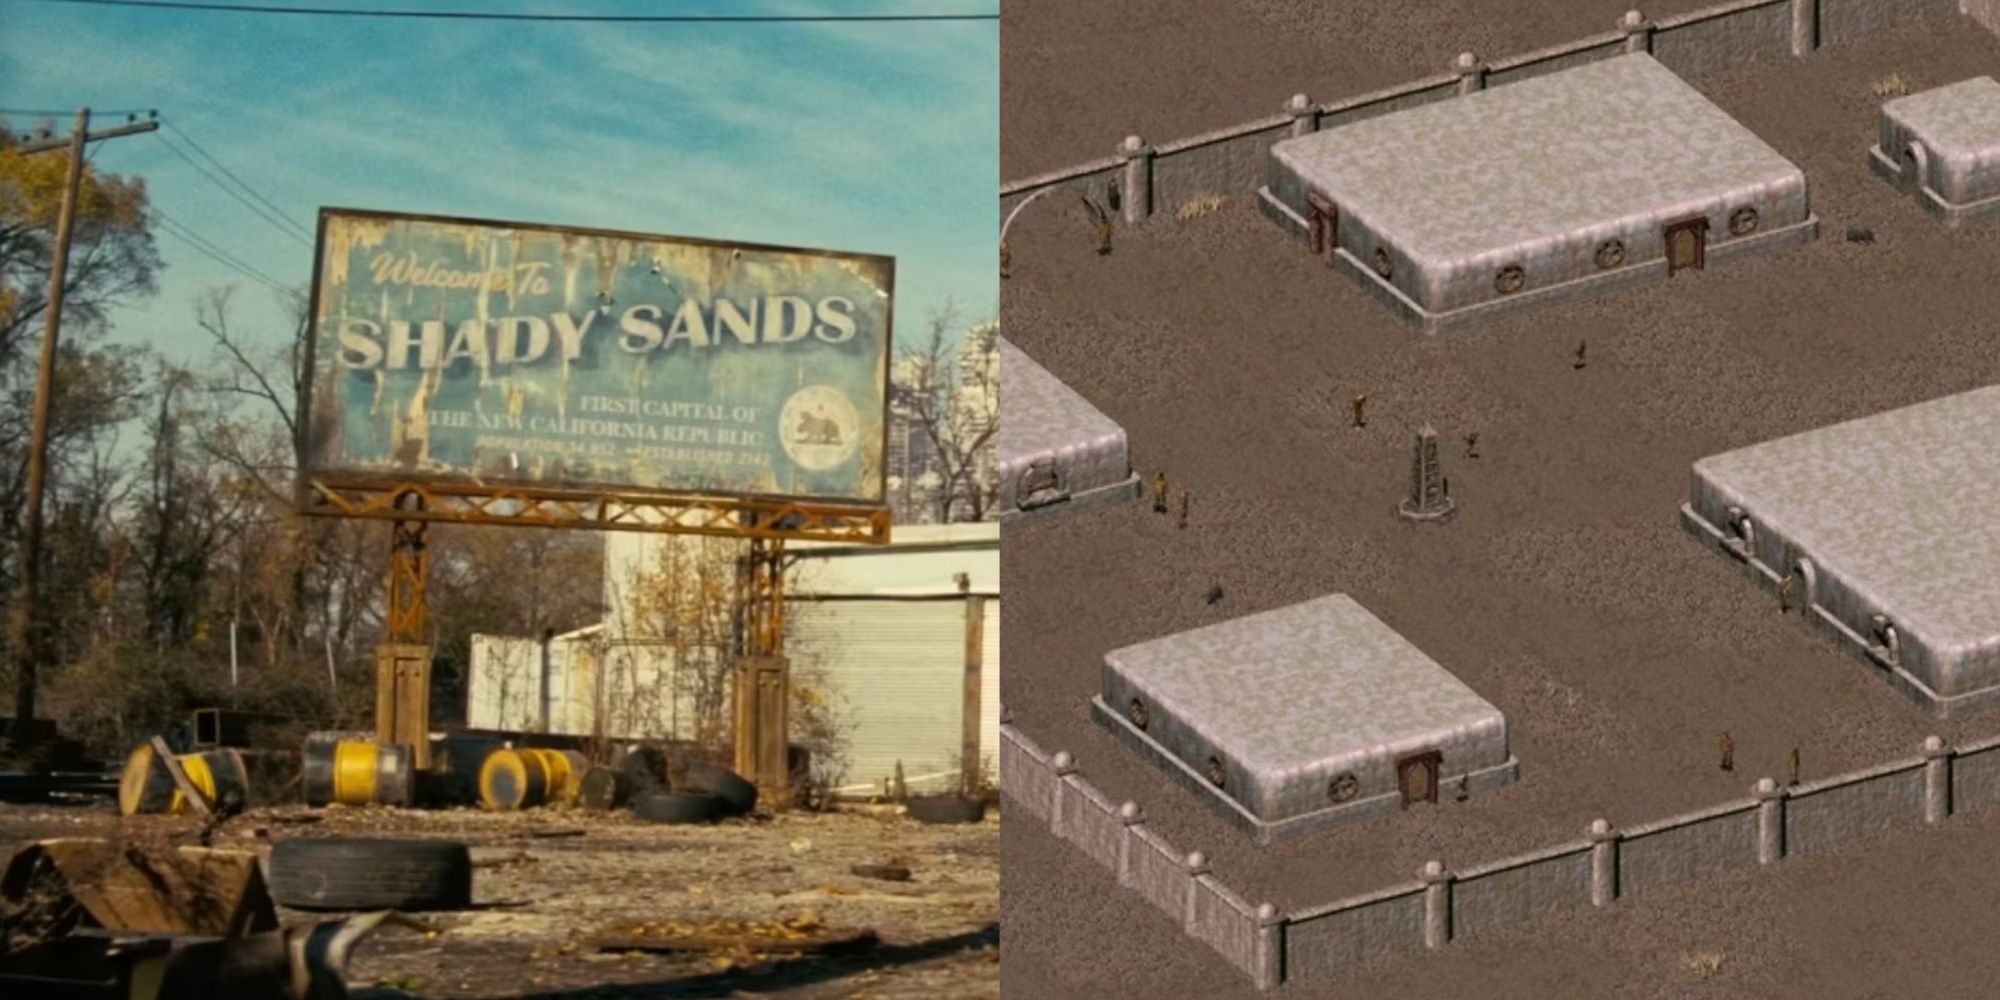 Split-image of the billboard for the abandoned Shady Sands area in the Fallout TV show and how Shady Sands appears in the original Fallout game.